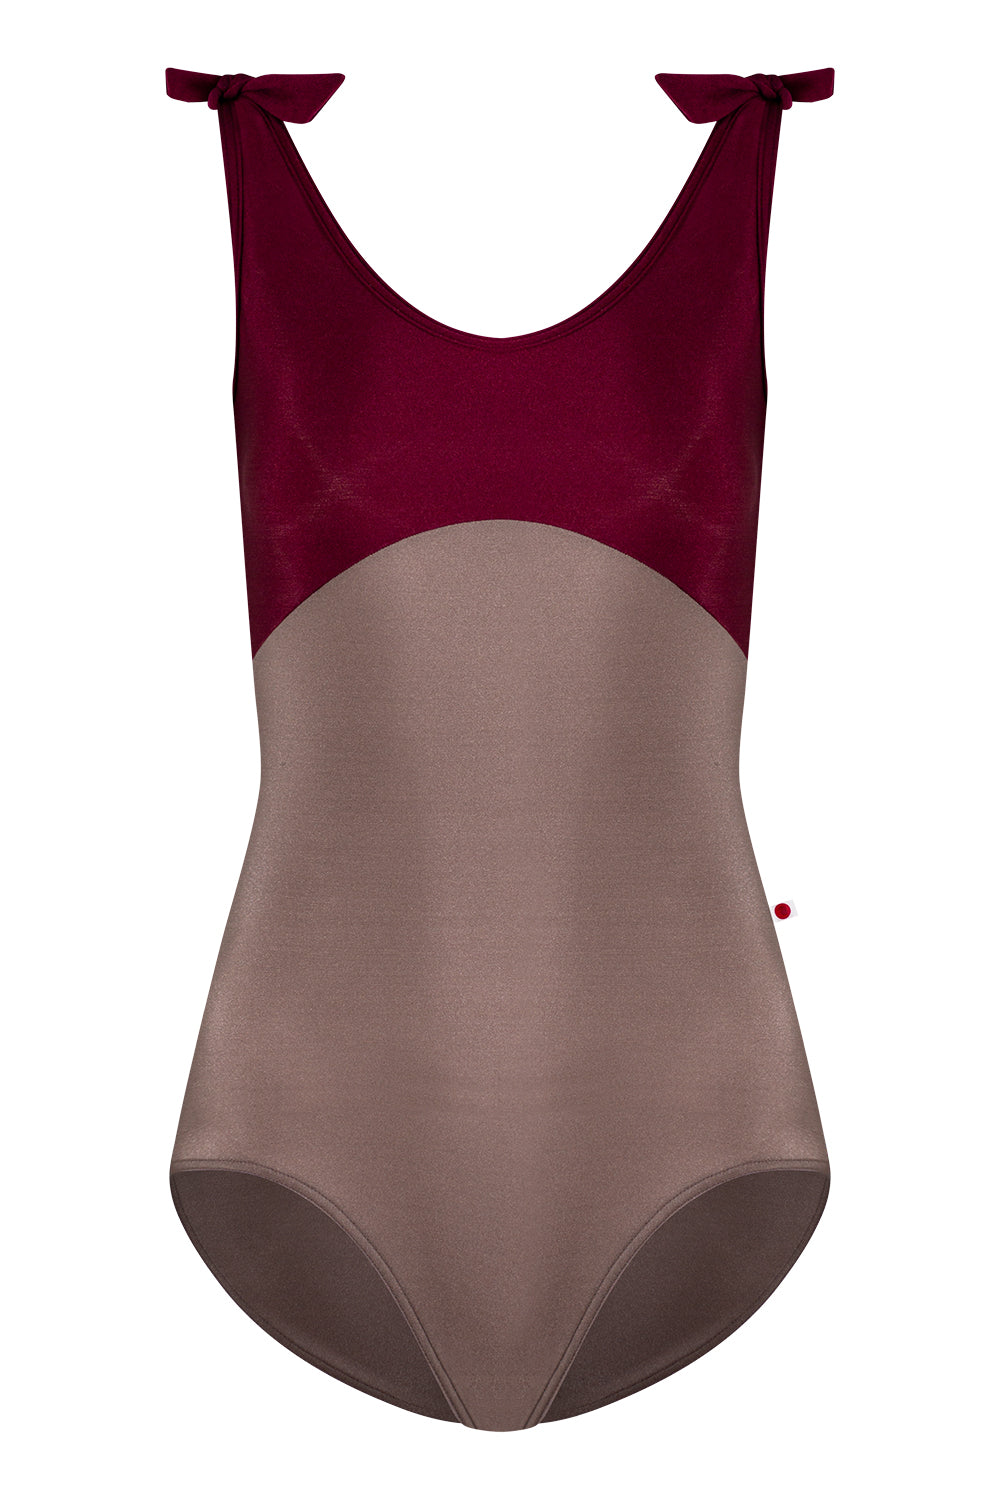 Anna Duo leotard in N-Star body color with N-Burgundy top & trim color and matching shoulder bows